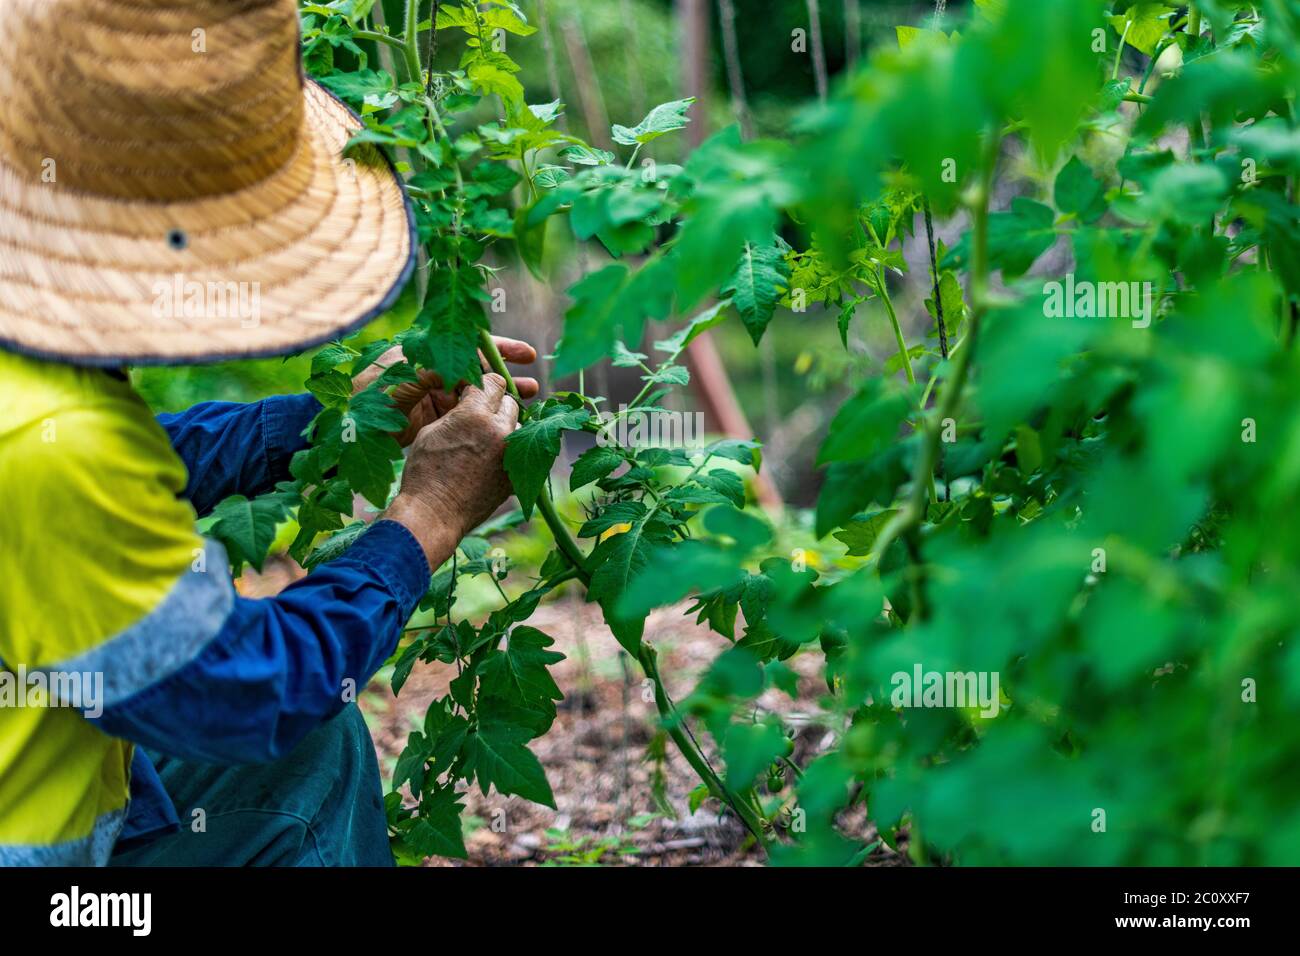 Gardener tending young tomato bush. No dig vegetable garden. Permaculture gardening principles. Self sufficiency, organic food, sustainability. Rural Stock Photo